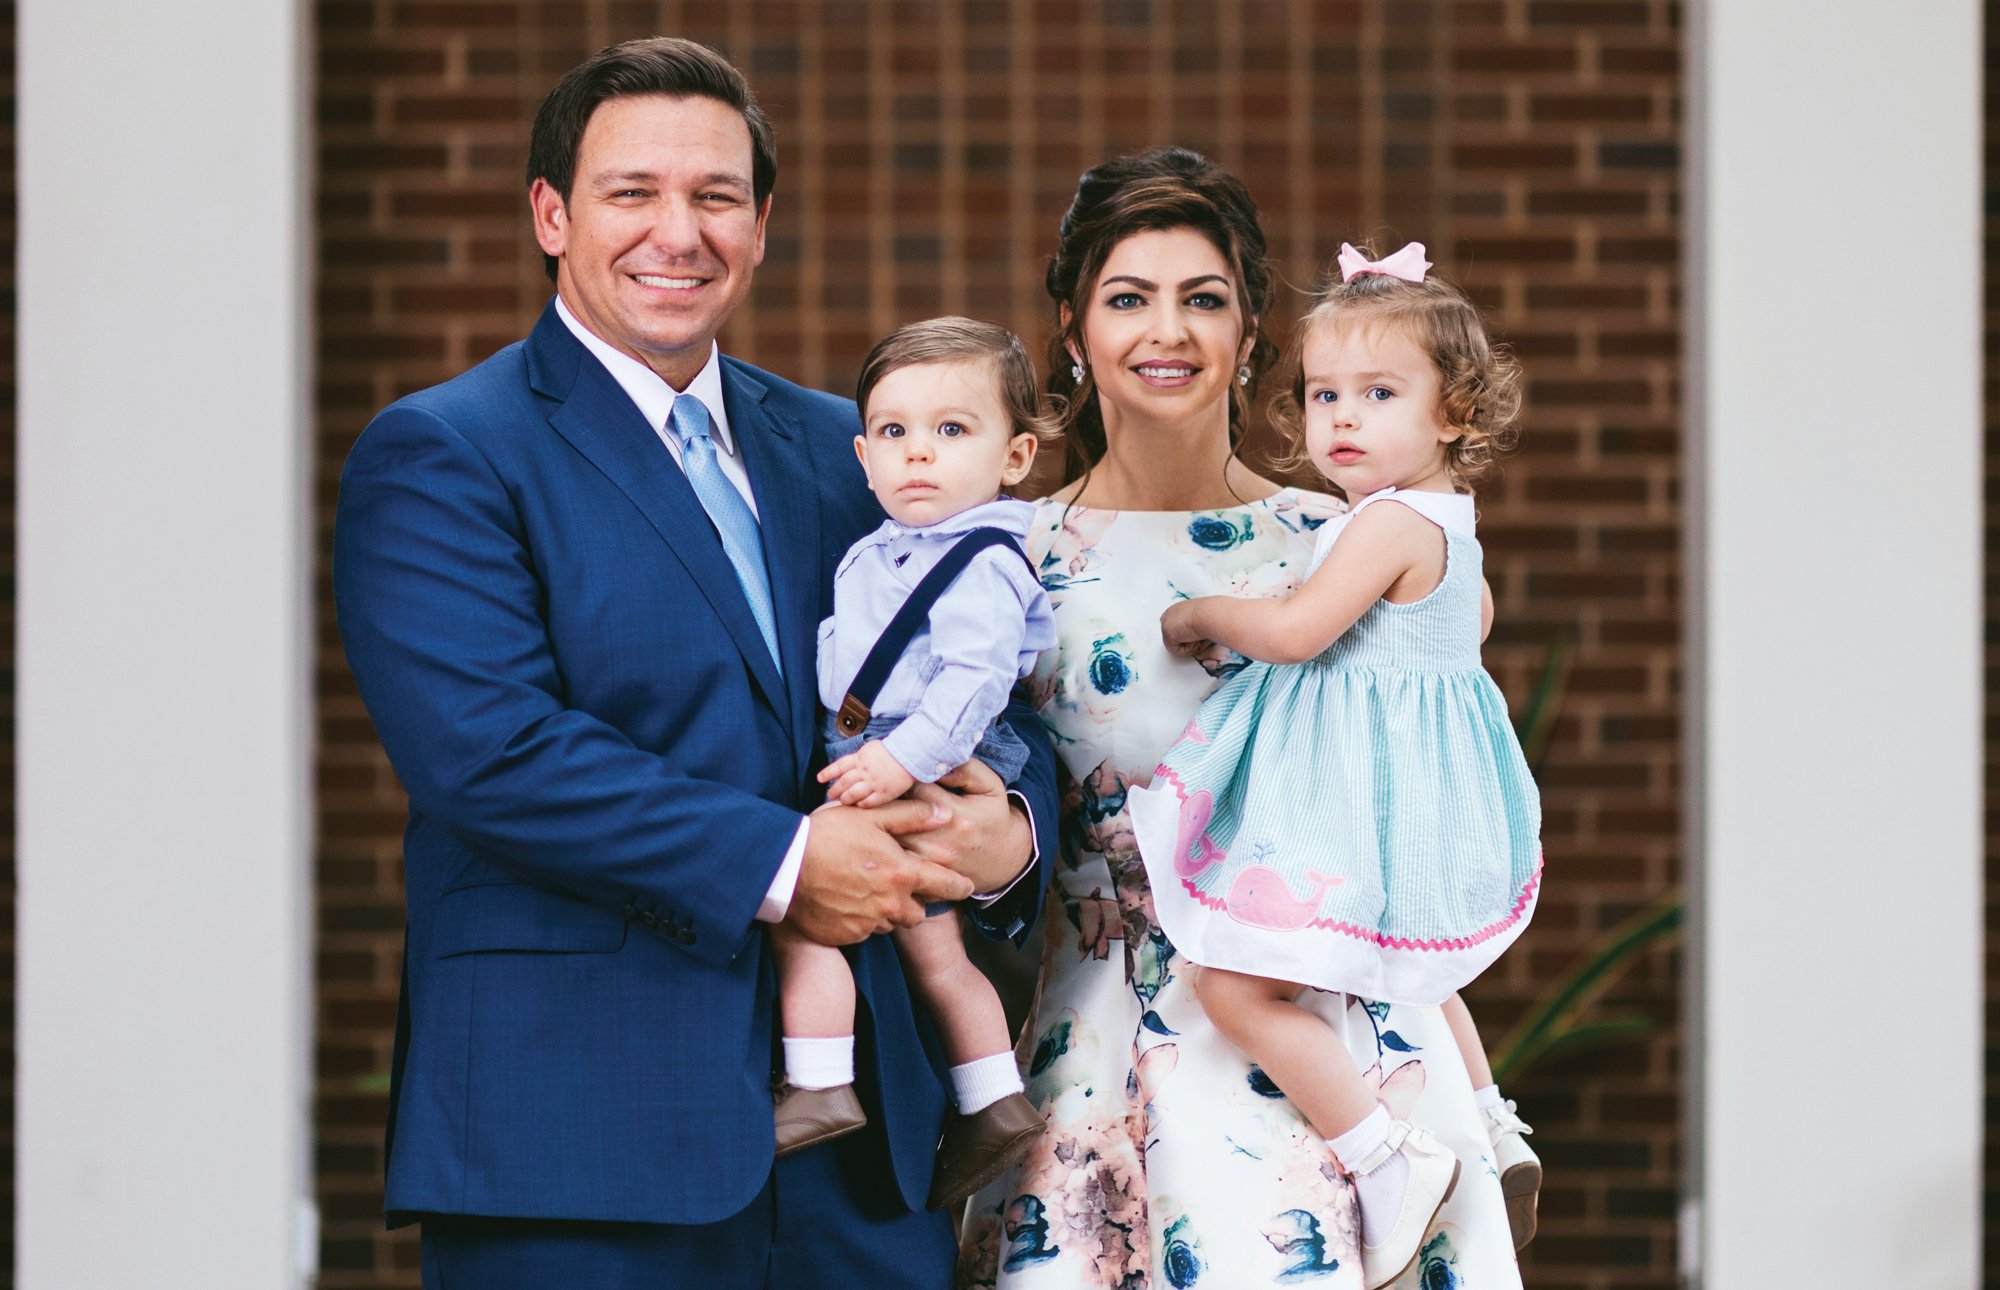 Ron and Casey DeSantis on New Life as the First Family - Tallahassee Magazine